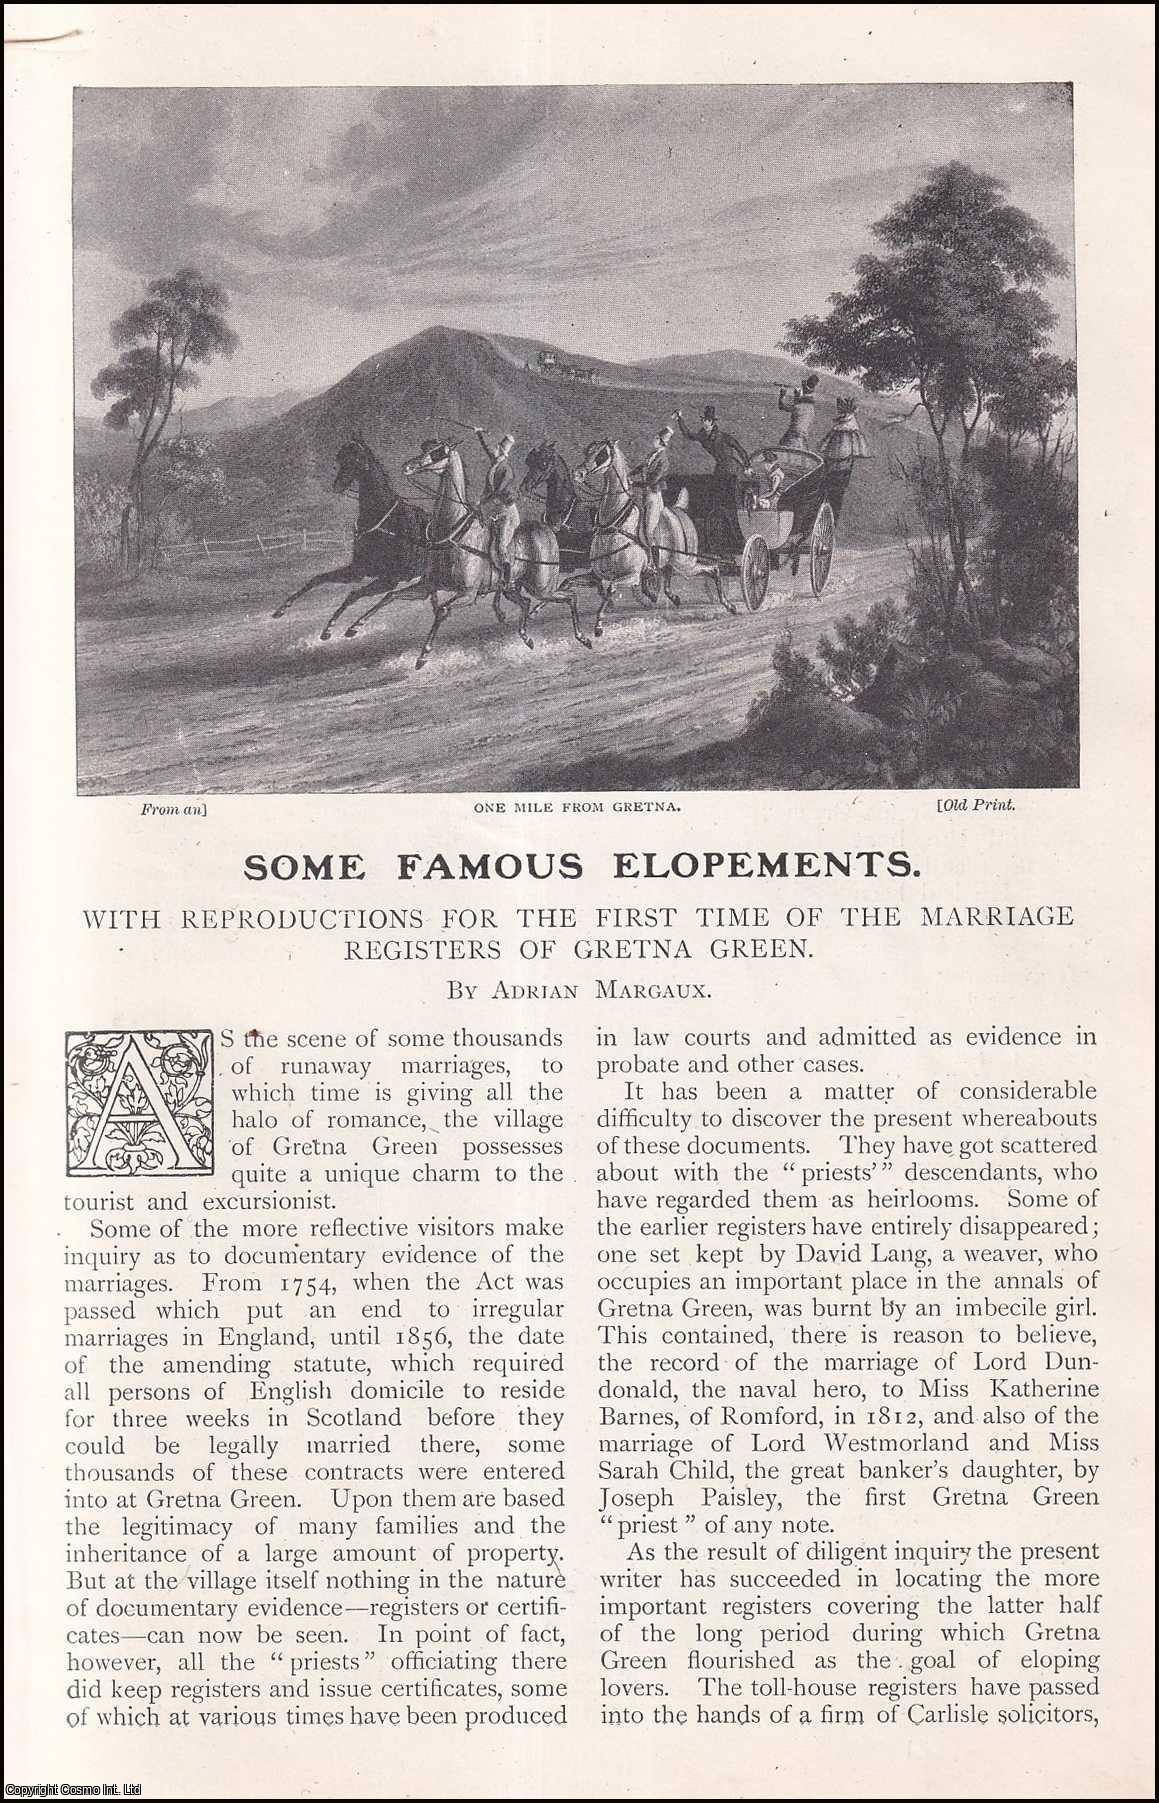 Adrian Margaux - Some Famous Elopements. With Reproductions for the first time of the Marriage Registers of Gretna Green. An uncommon original article from The Strand Magazine, 1906.